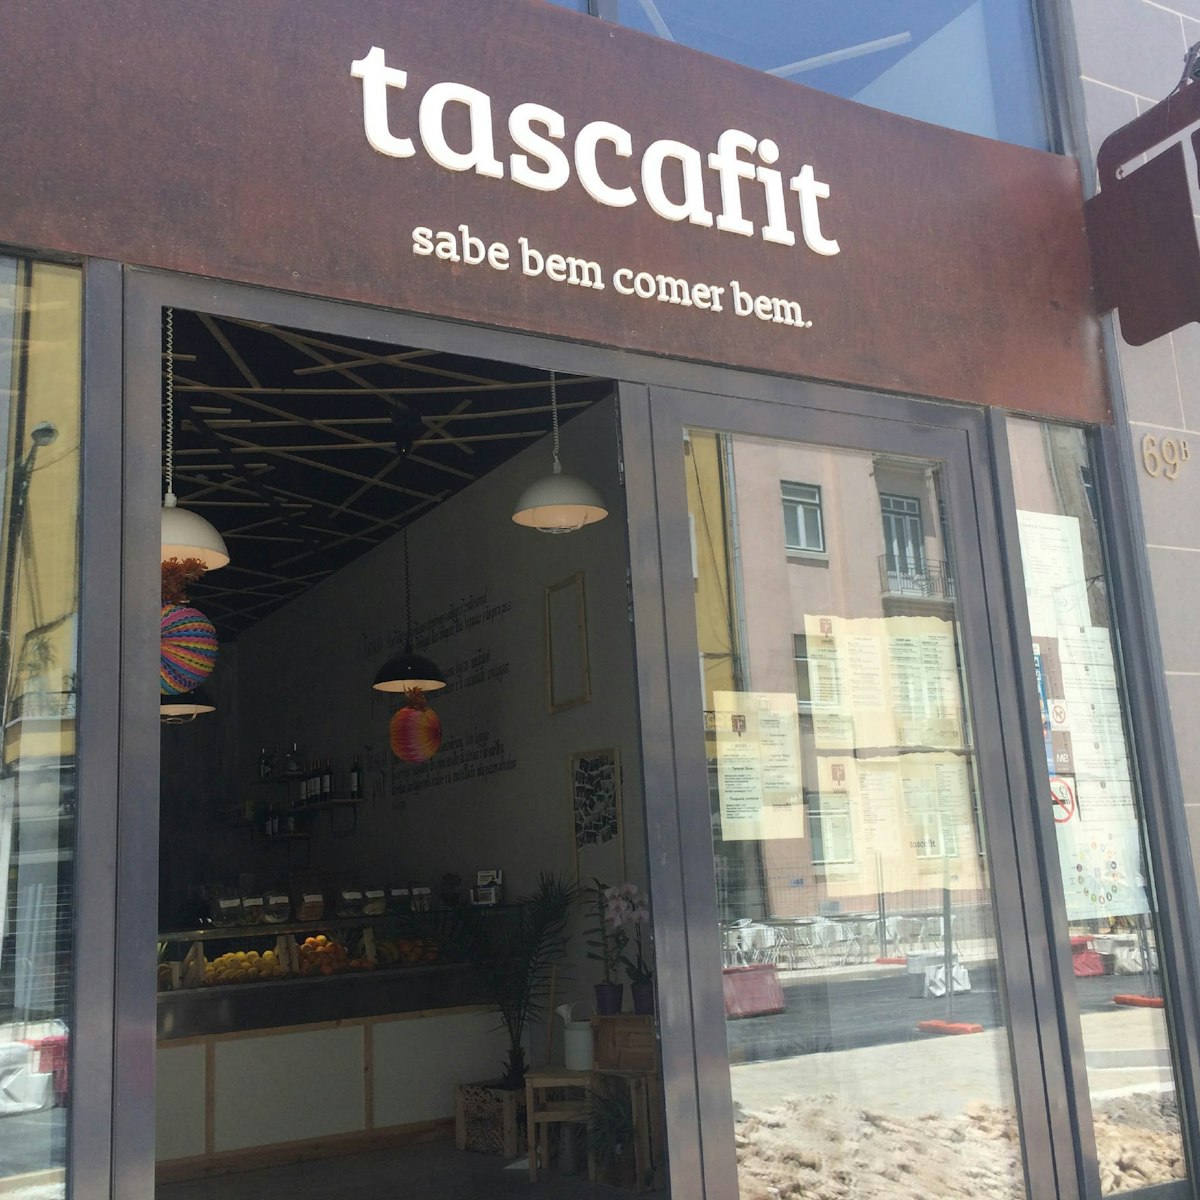 Tasca Fit blends healthy food with the traditional techniques of the Portuguese cuisine